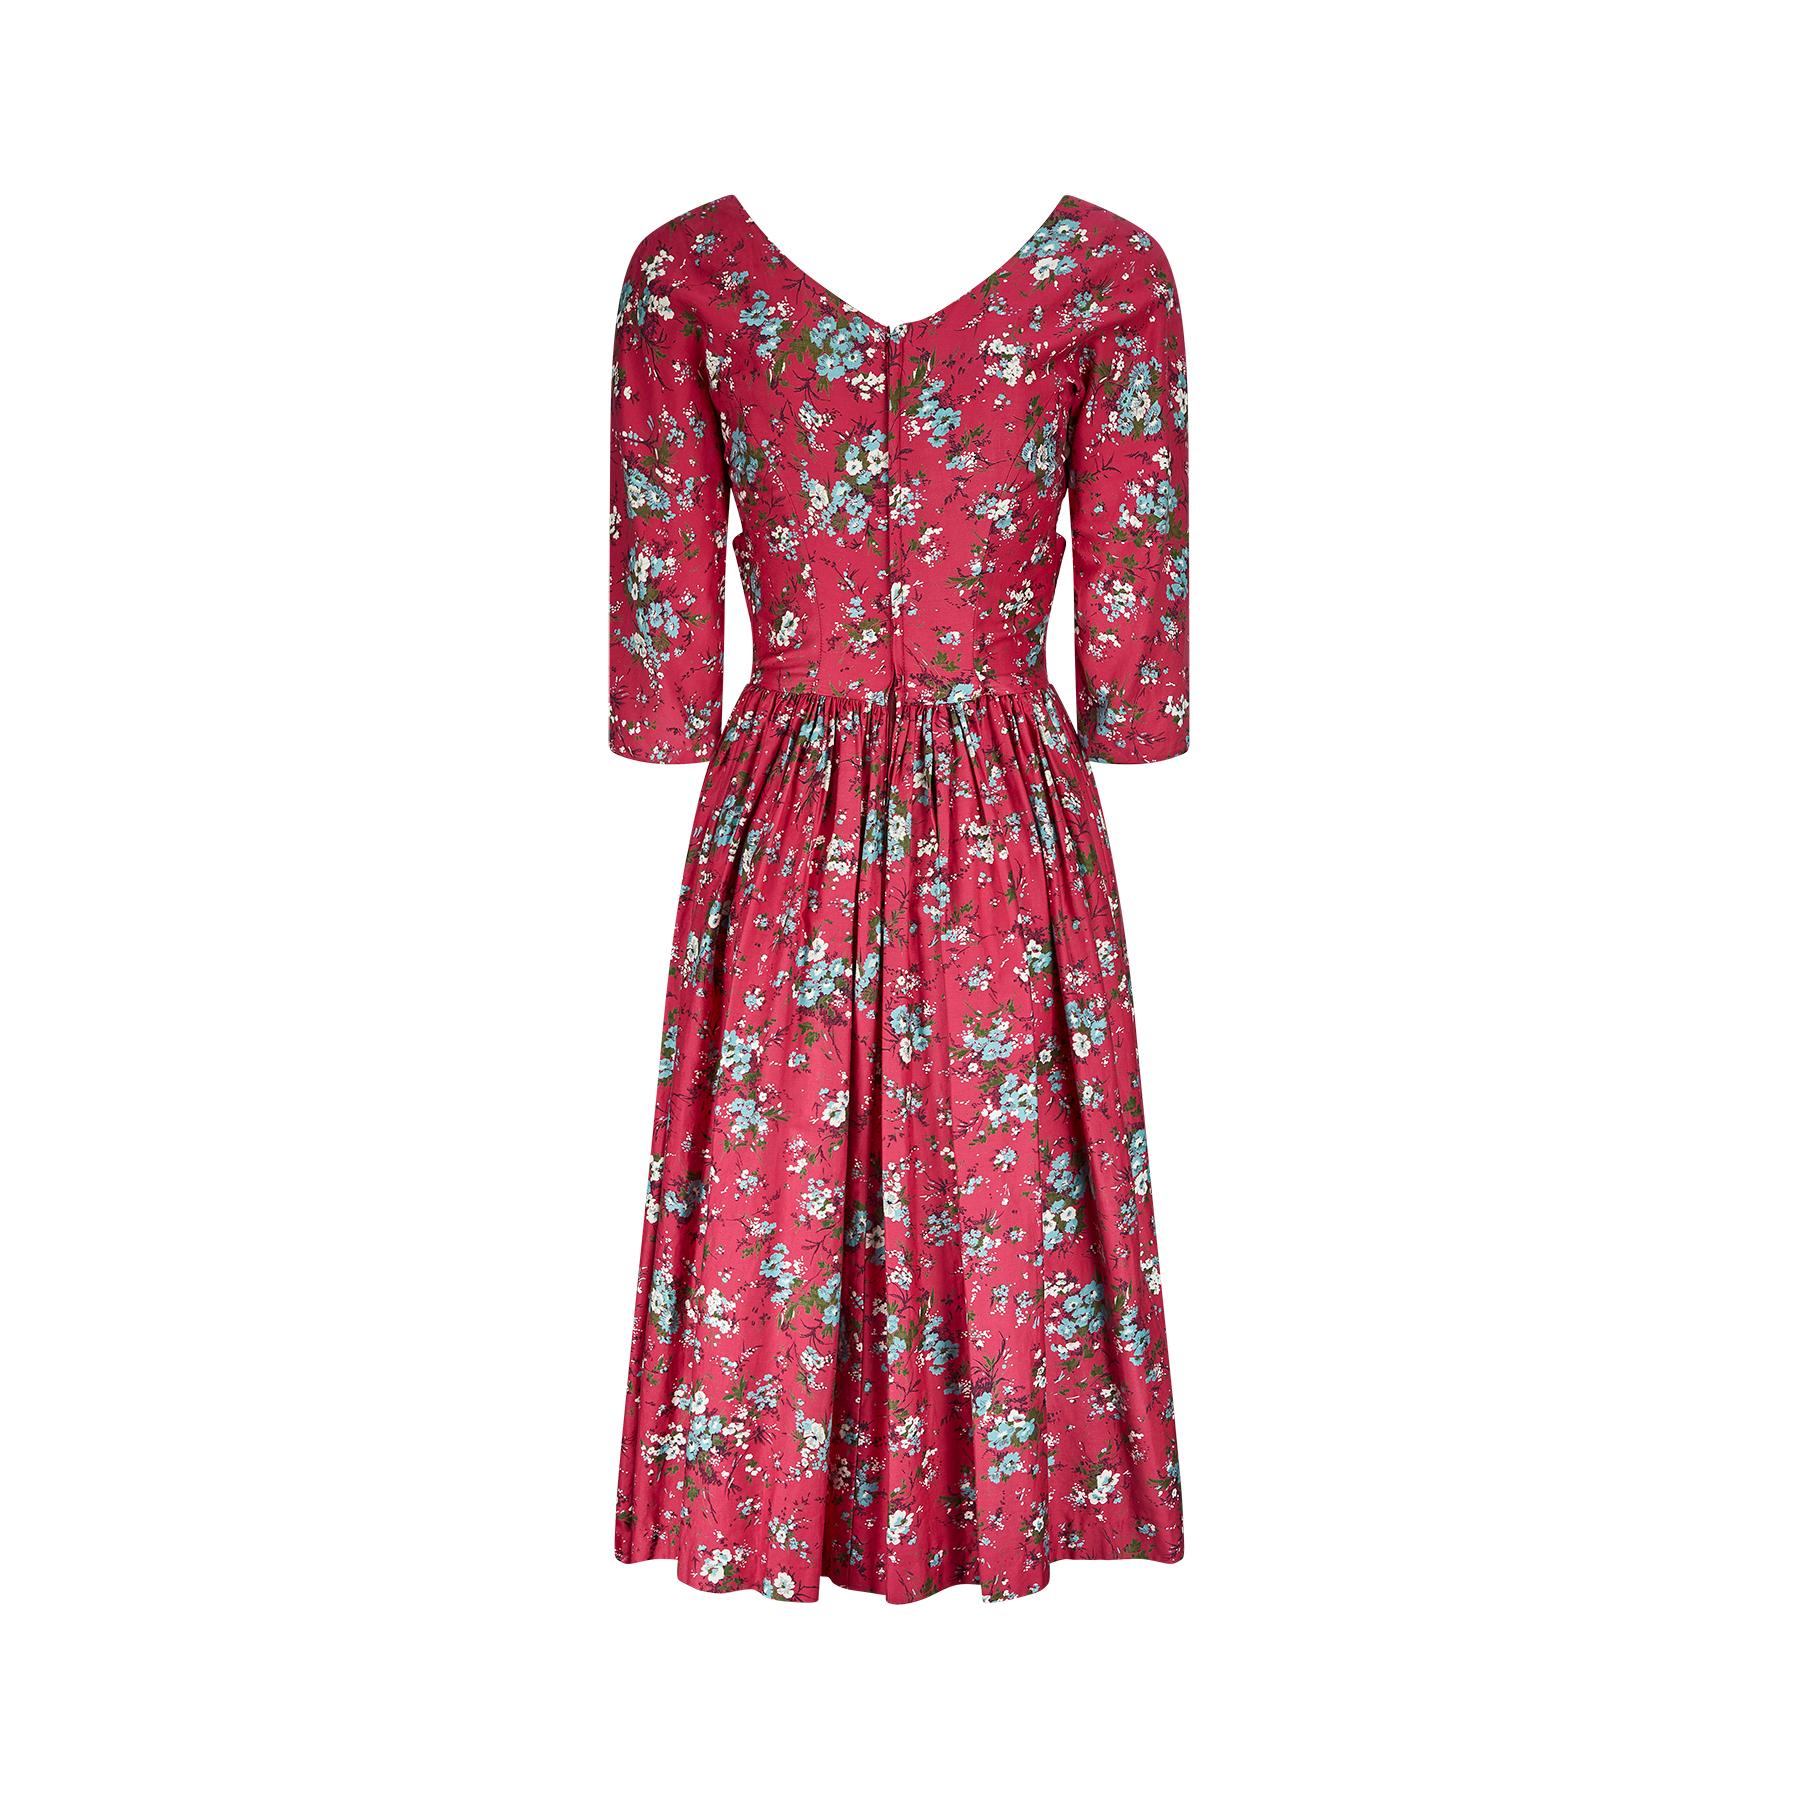 Original 1950s dress from quality British label, Melbray, in a wonderful deep cerise polished cotton. The floral print looks like forget me nots in a brilliant turquoise and white which contrasts beautifully with the pink background. This dress has